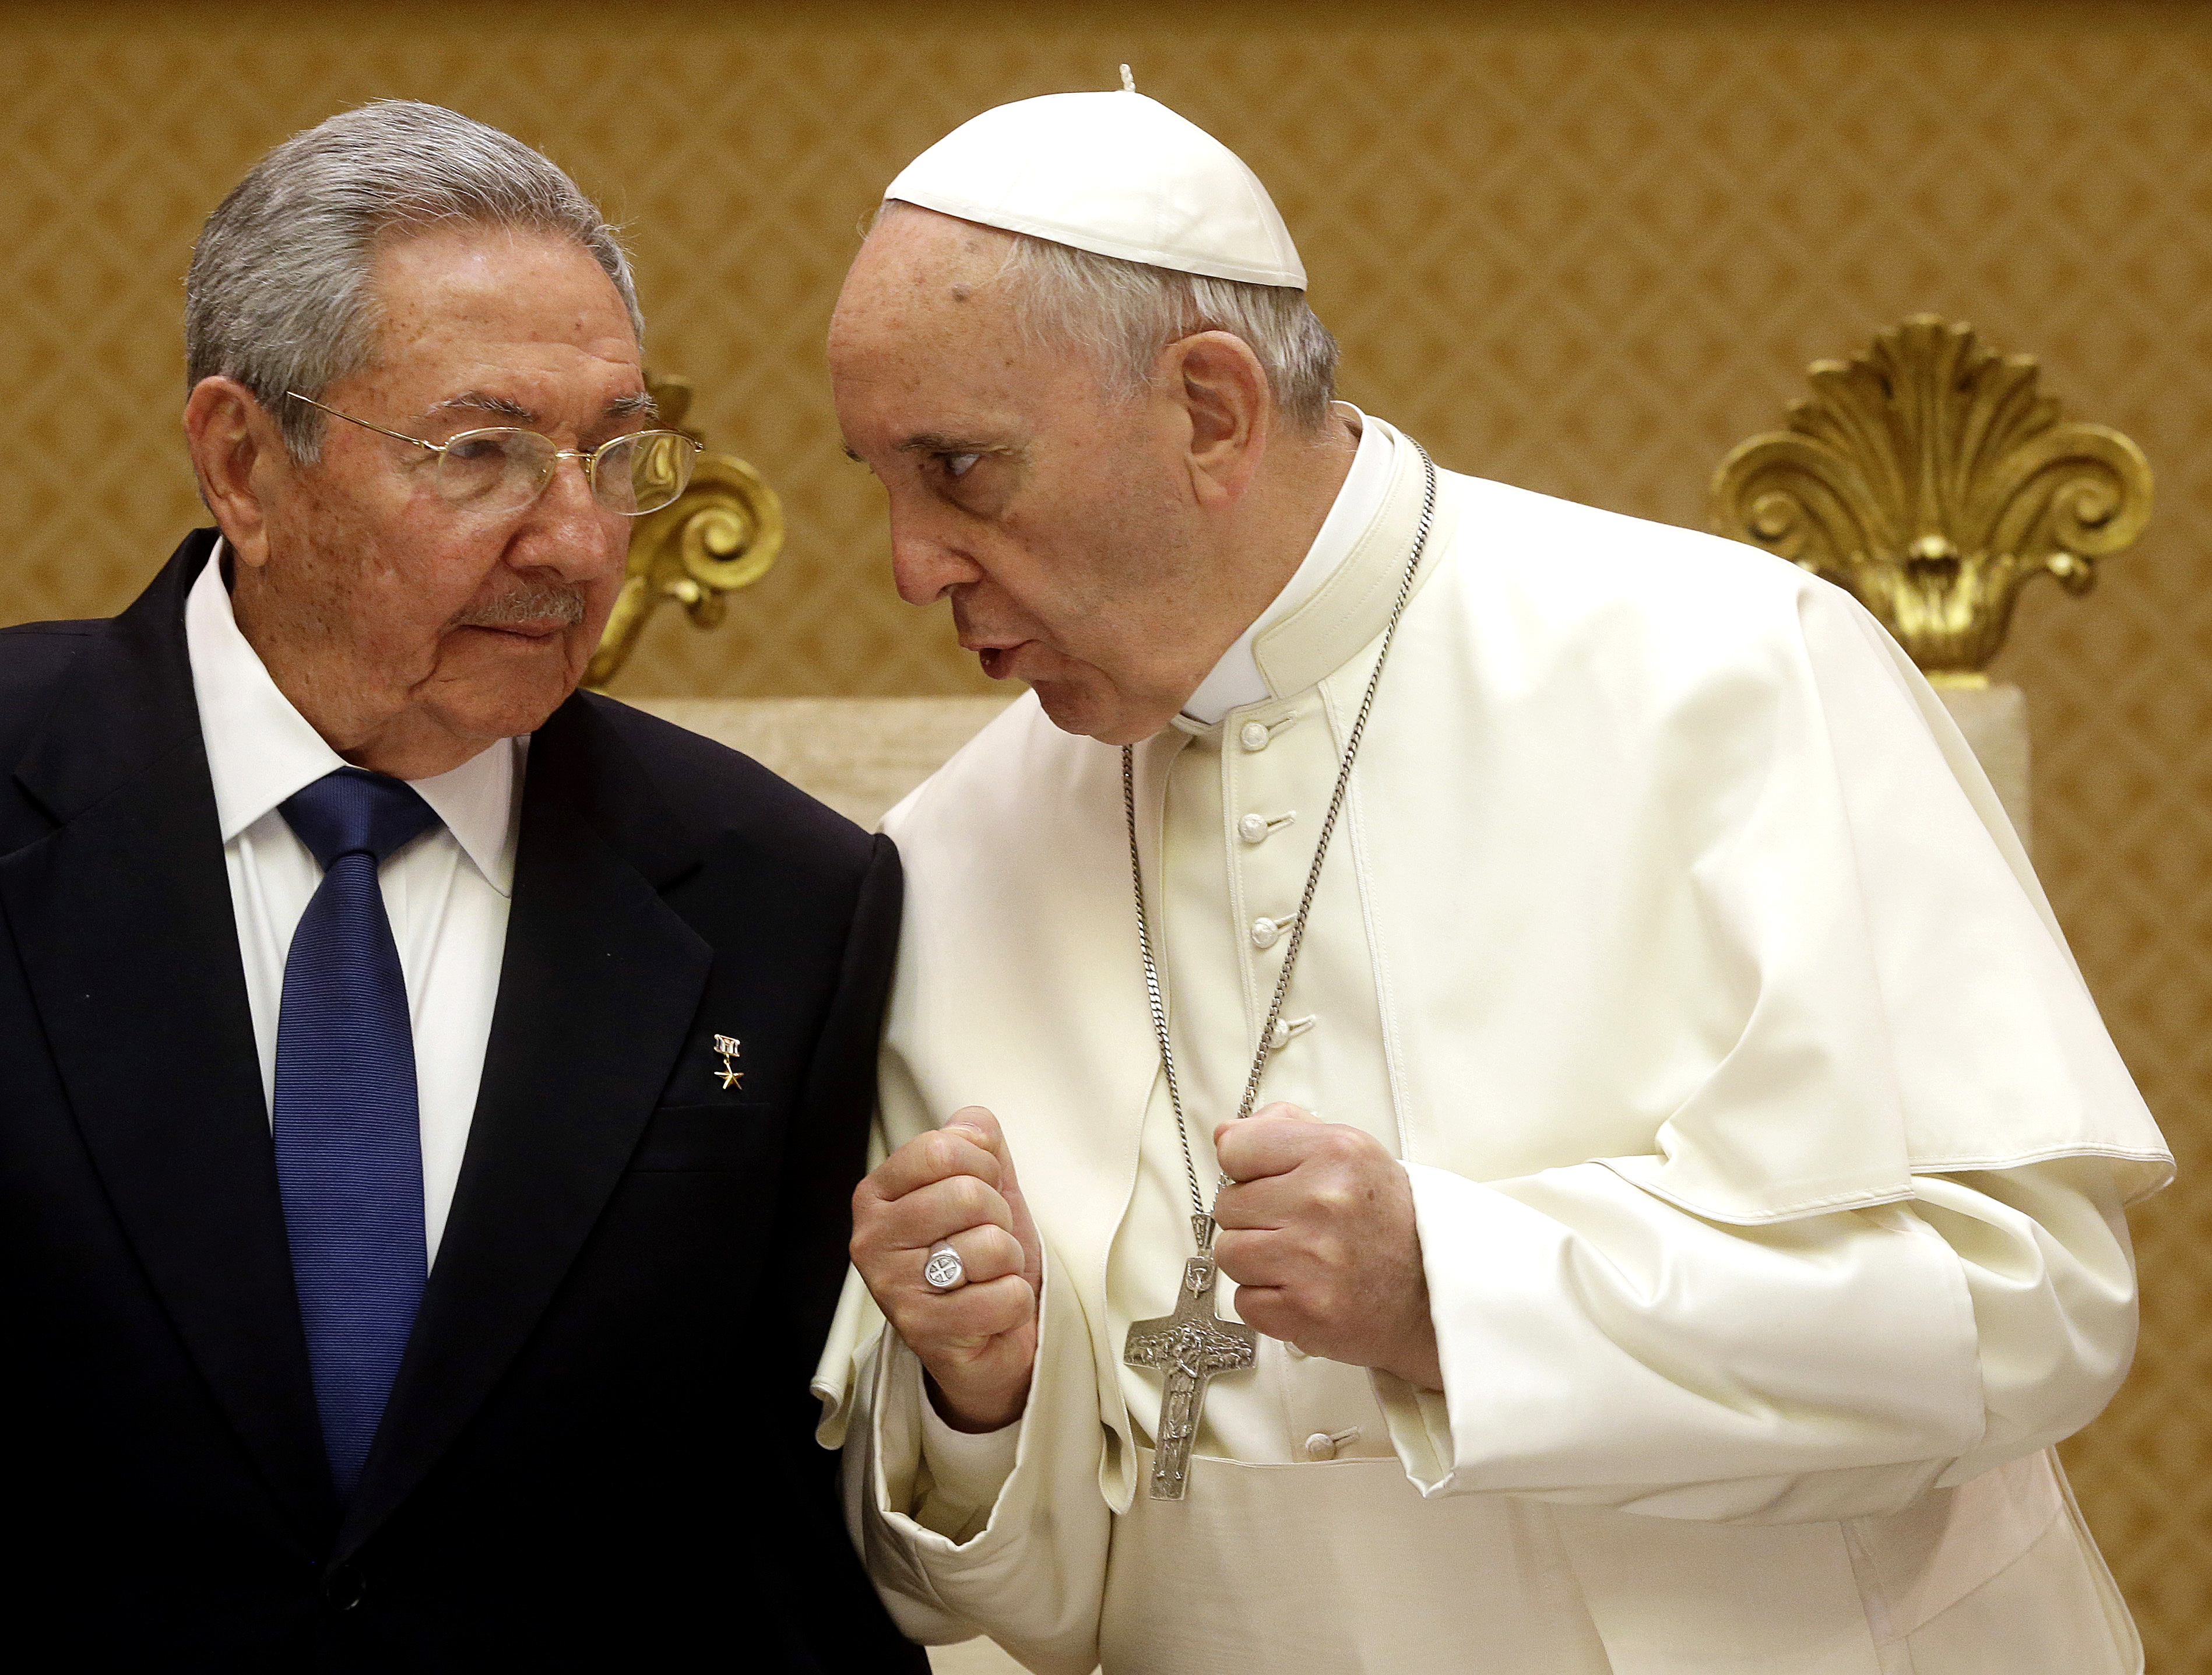 Castro meets the Pope- coming the full circle